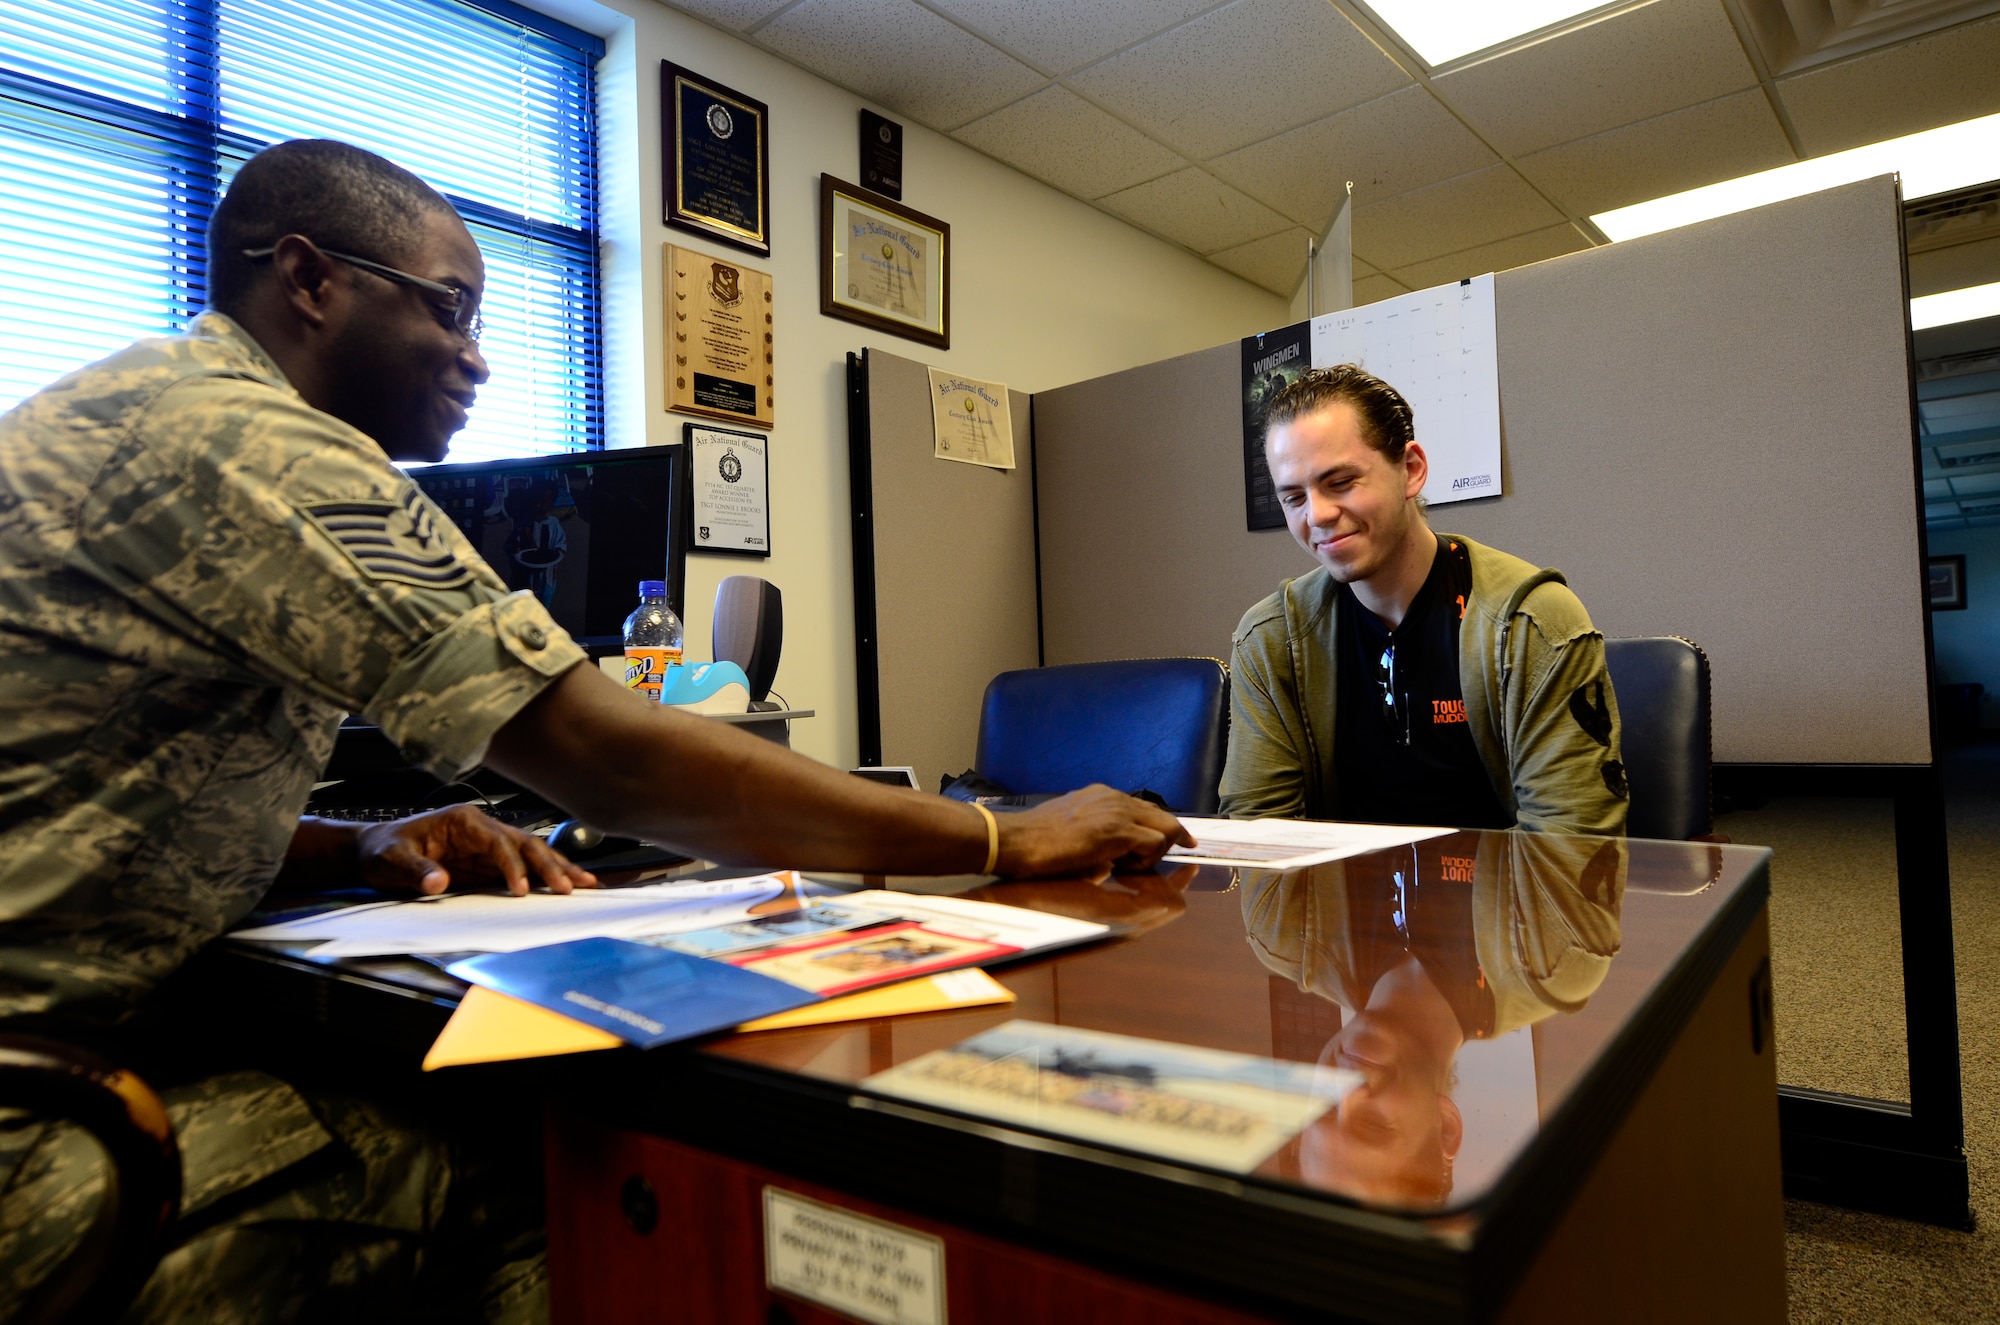 U.S. Air Force Tech. Sgt. Lonnie Brooks, production recruiter for the 145th Force Support Squadron, explains education benefits to Cristofer Grit (right) June 17, 2015, at North Carolina Air National Guard base, Charlotte Douglas International Airport, N.C., Grit, who is originally from Moldova, moved to the U.S. to pursue his passion in culinary arts and is now interested in joining the N.C. Air National Guard. (U.S. Air National Guard photo by Staff Sgt. Julianne M. Showalter, 145th Public Affairs/Released)